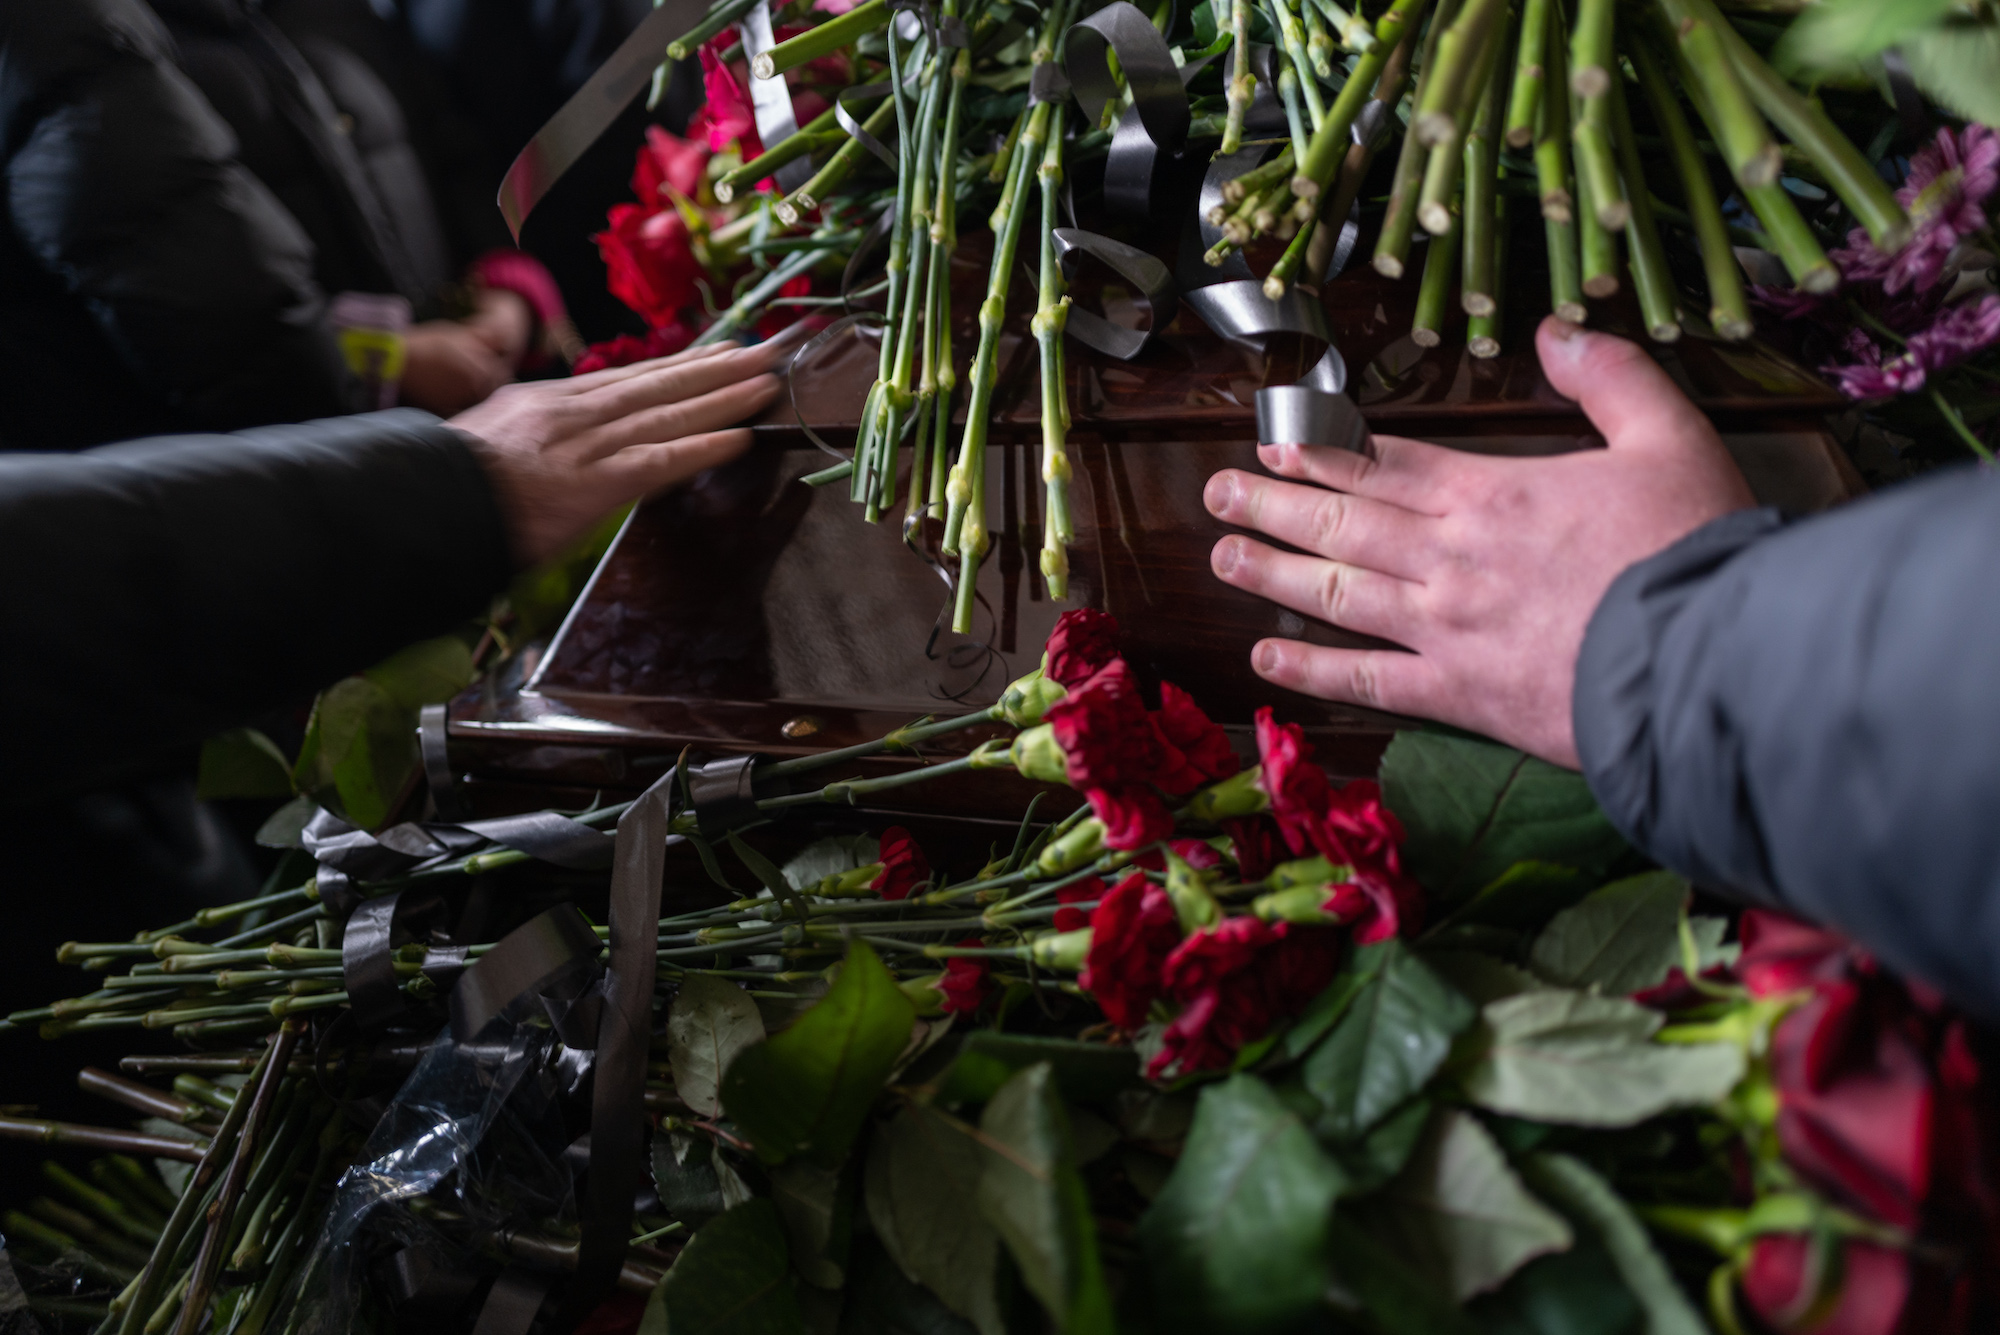 People lay flowers at the coffin of Mykhailo Korenovsky, a boxing coach and father killed in a Russian missile strike on an apartment building on Tuesday in Dnipro.